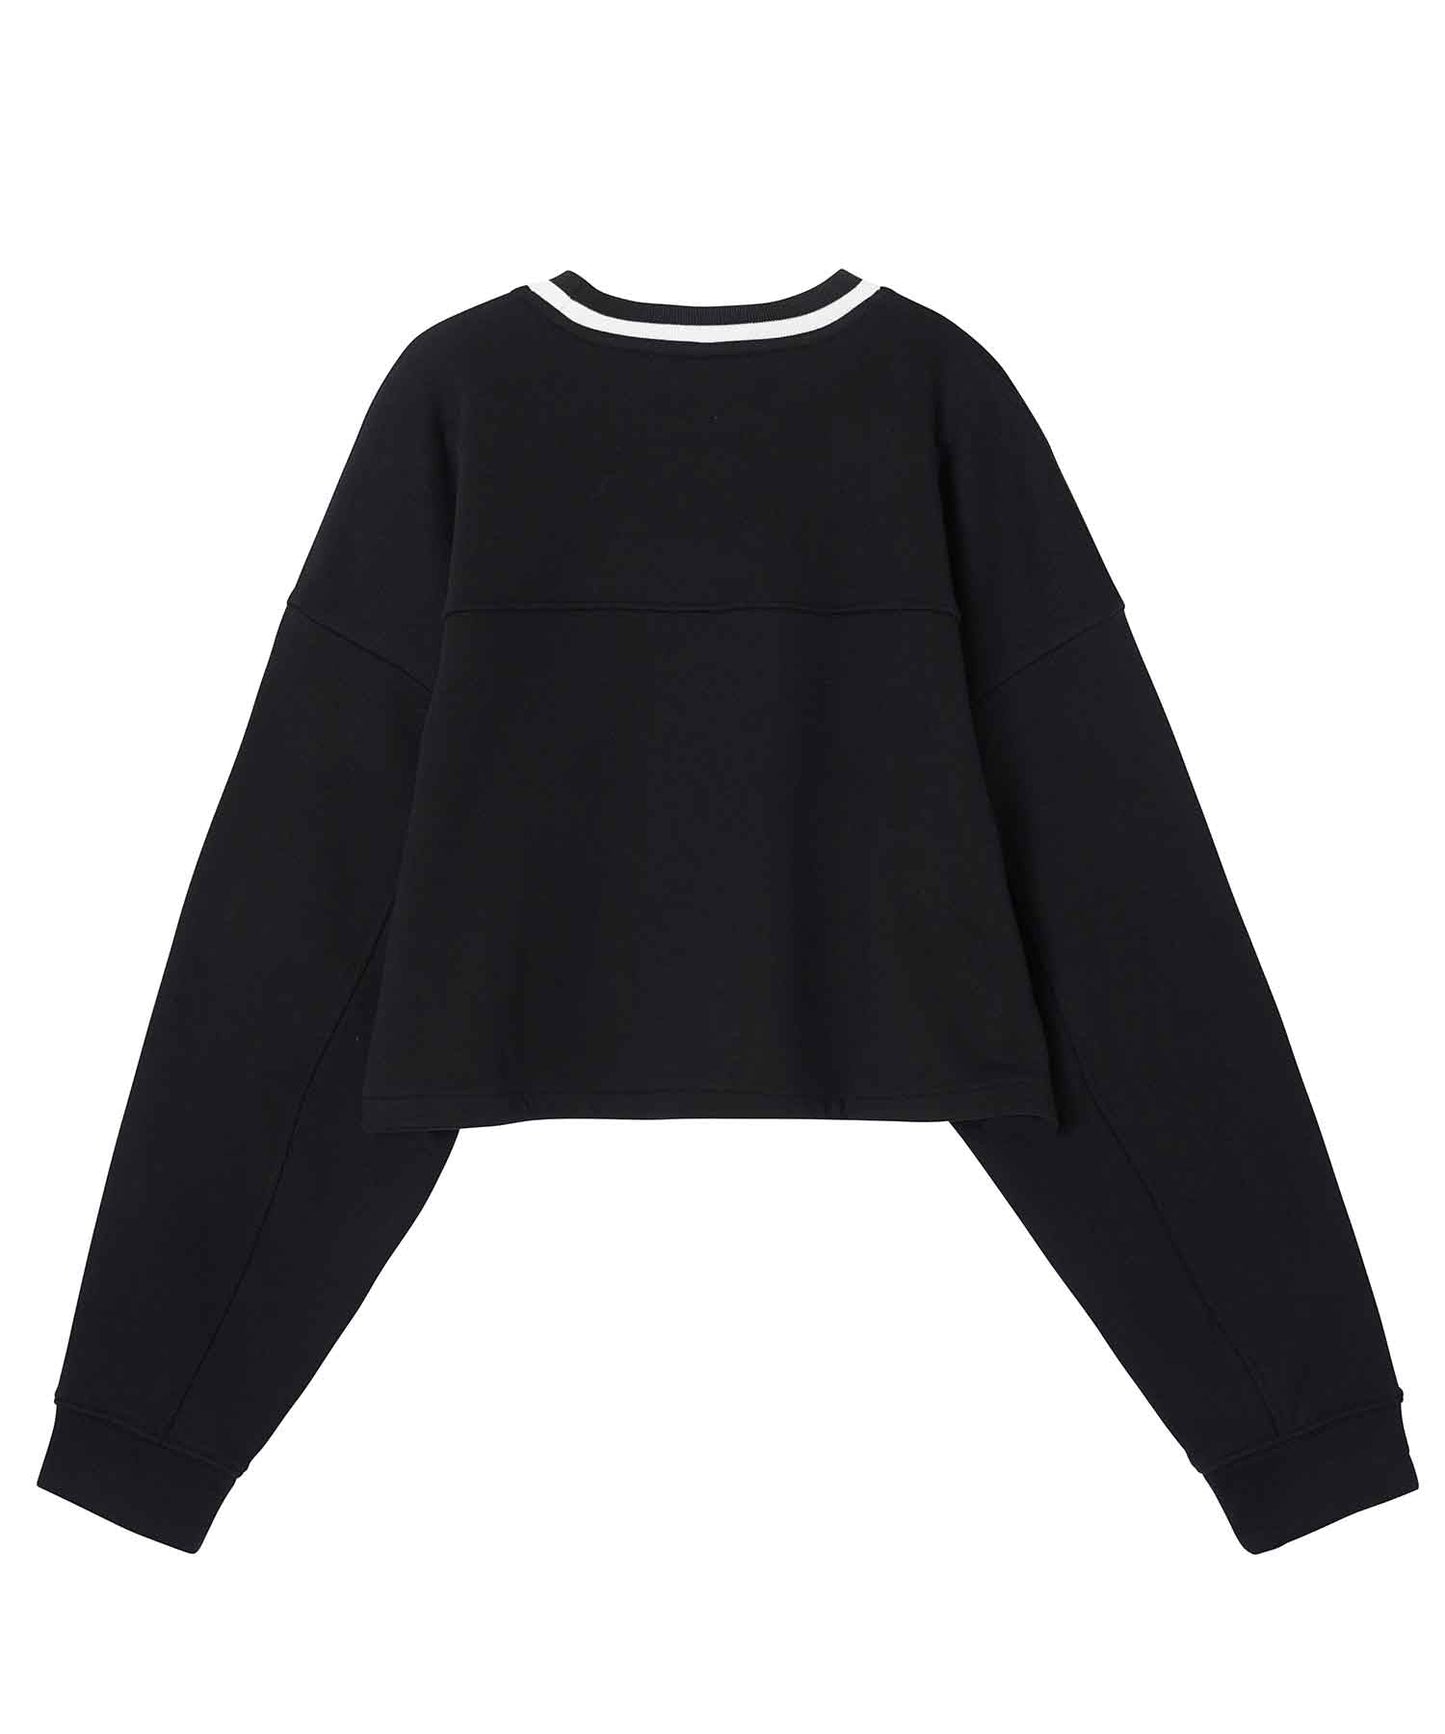 CONTRAST LINE CROPPED SWEAT TOP